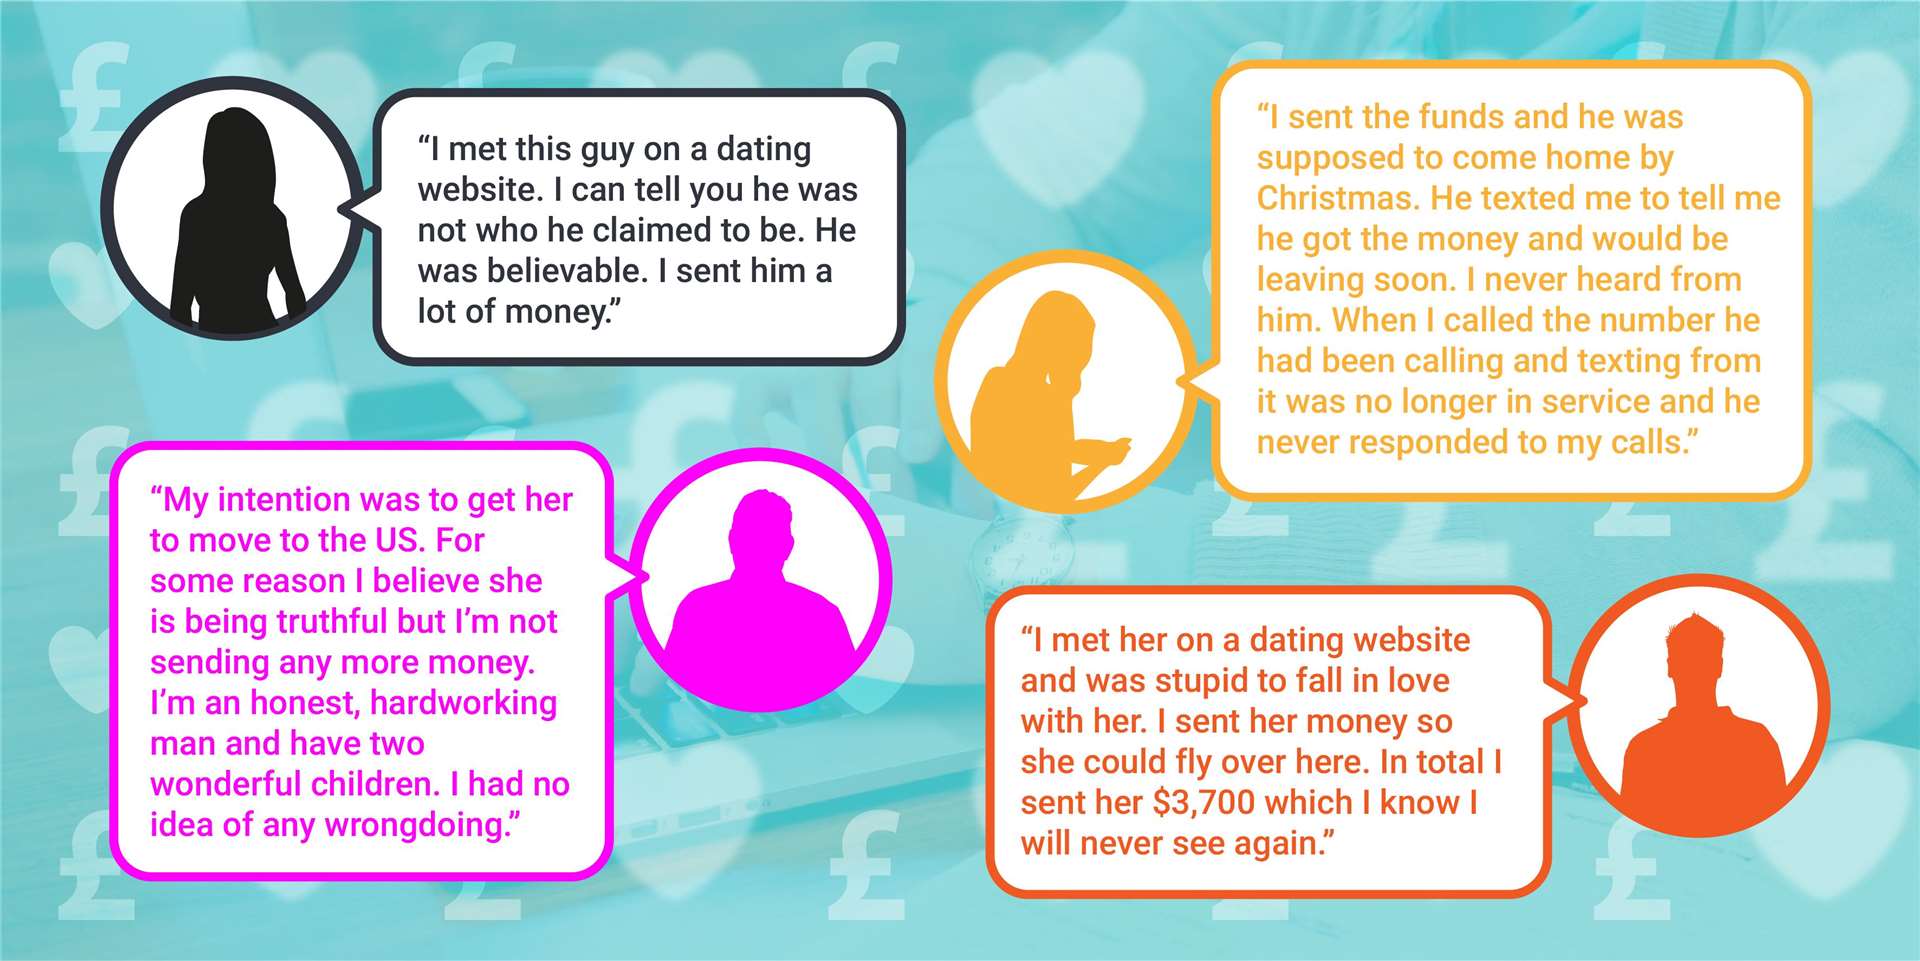 Examples of how people are tricked into handing over money through romance fraud (2905703)